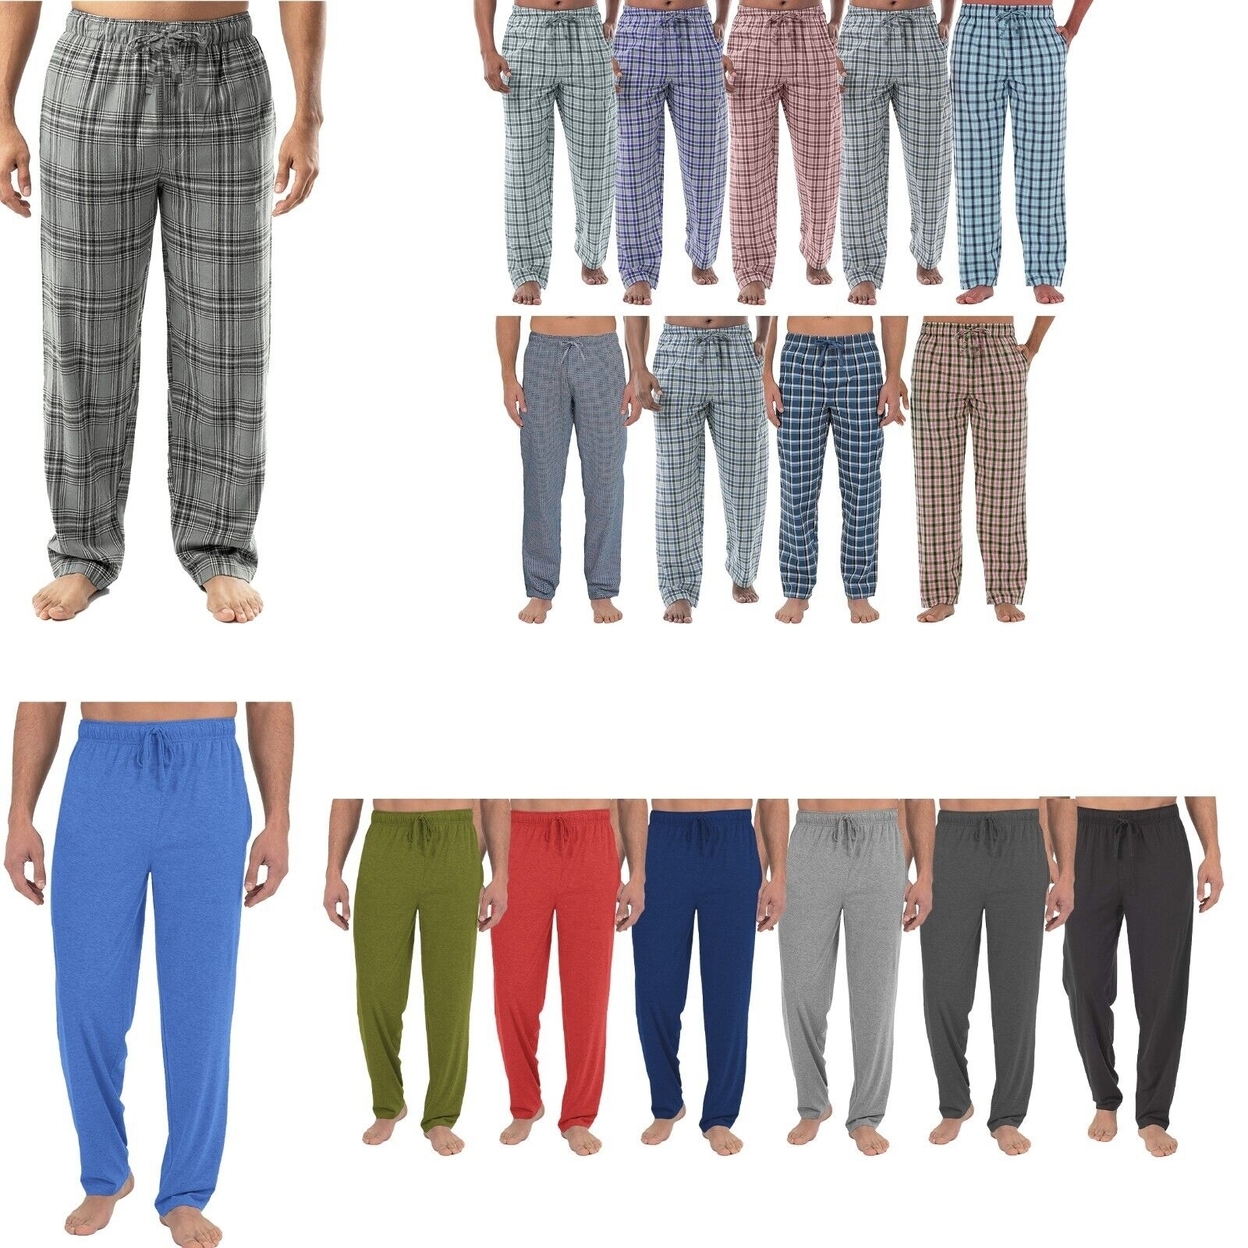 Men's Ultra-Soft Solid & Plaid Cotton Jersey Knit Comfy Sleep Lounge Pajama Pants - Solid, X-large